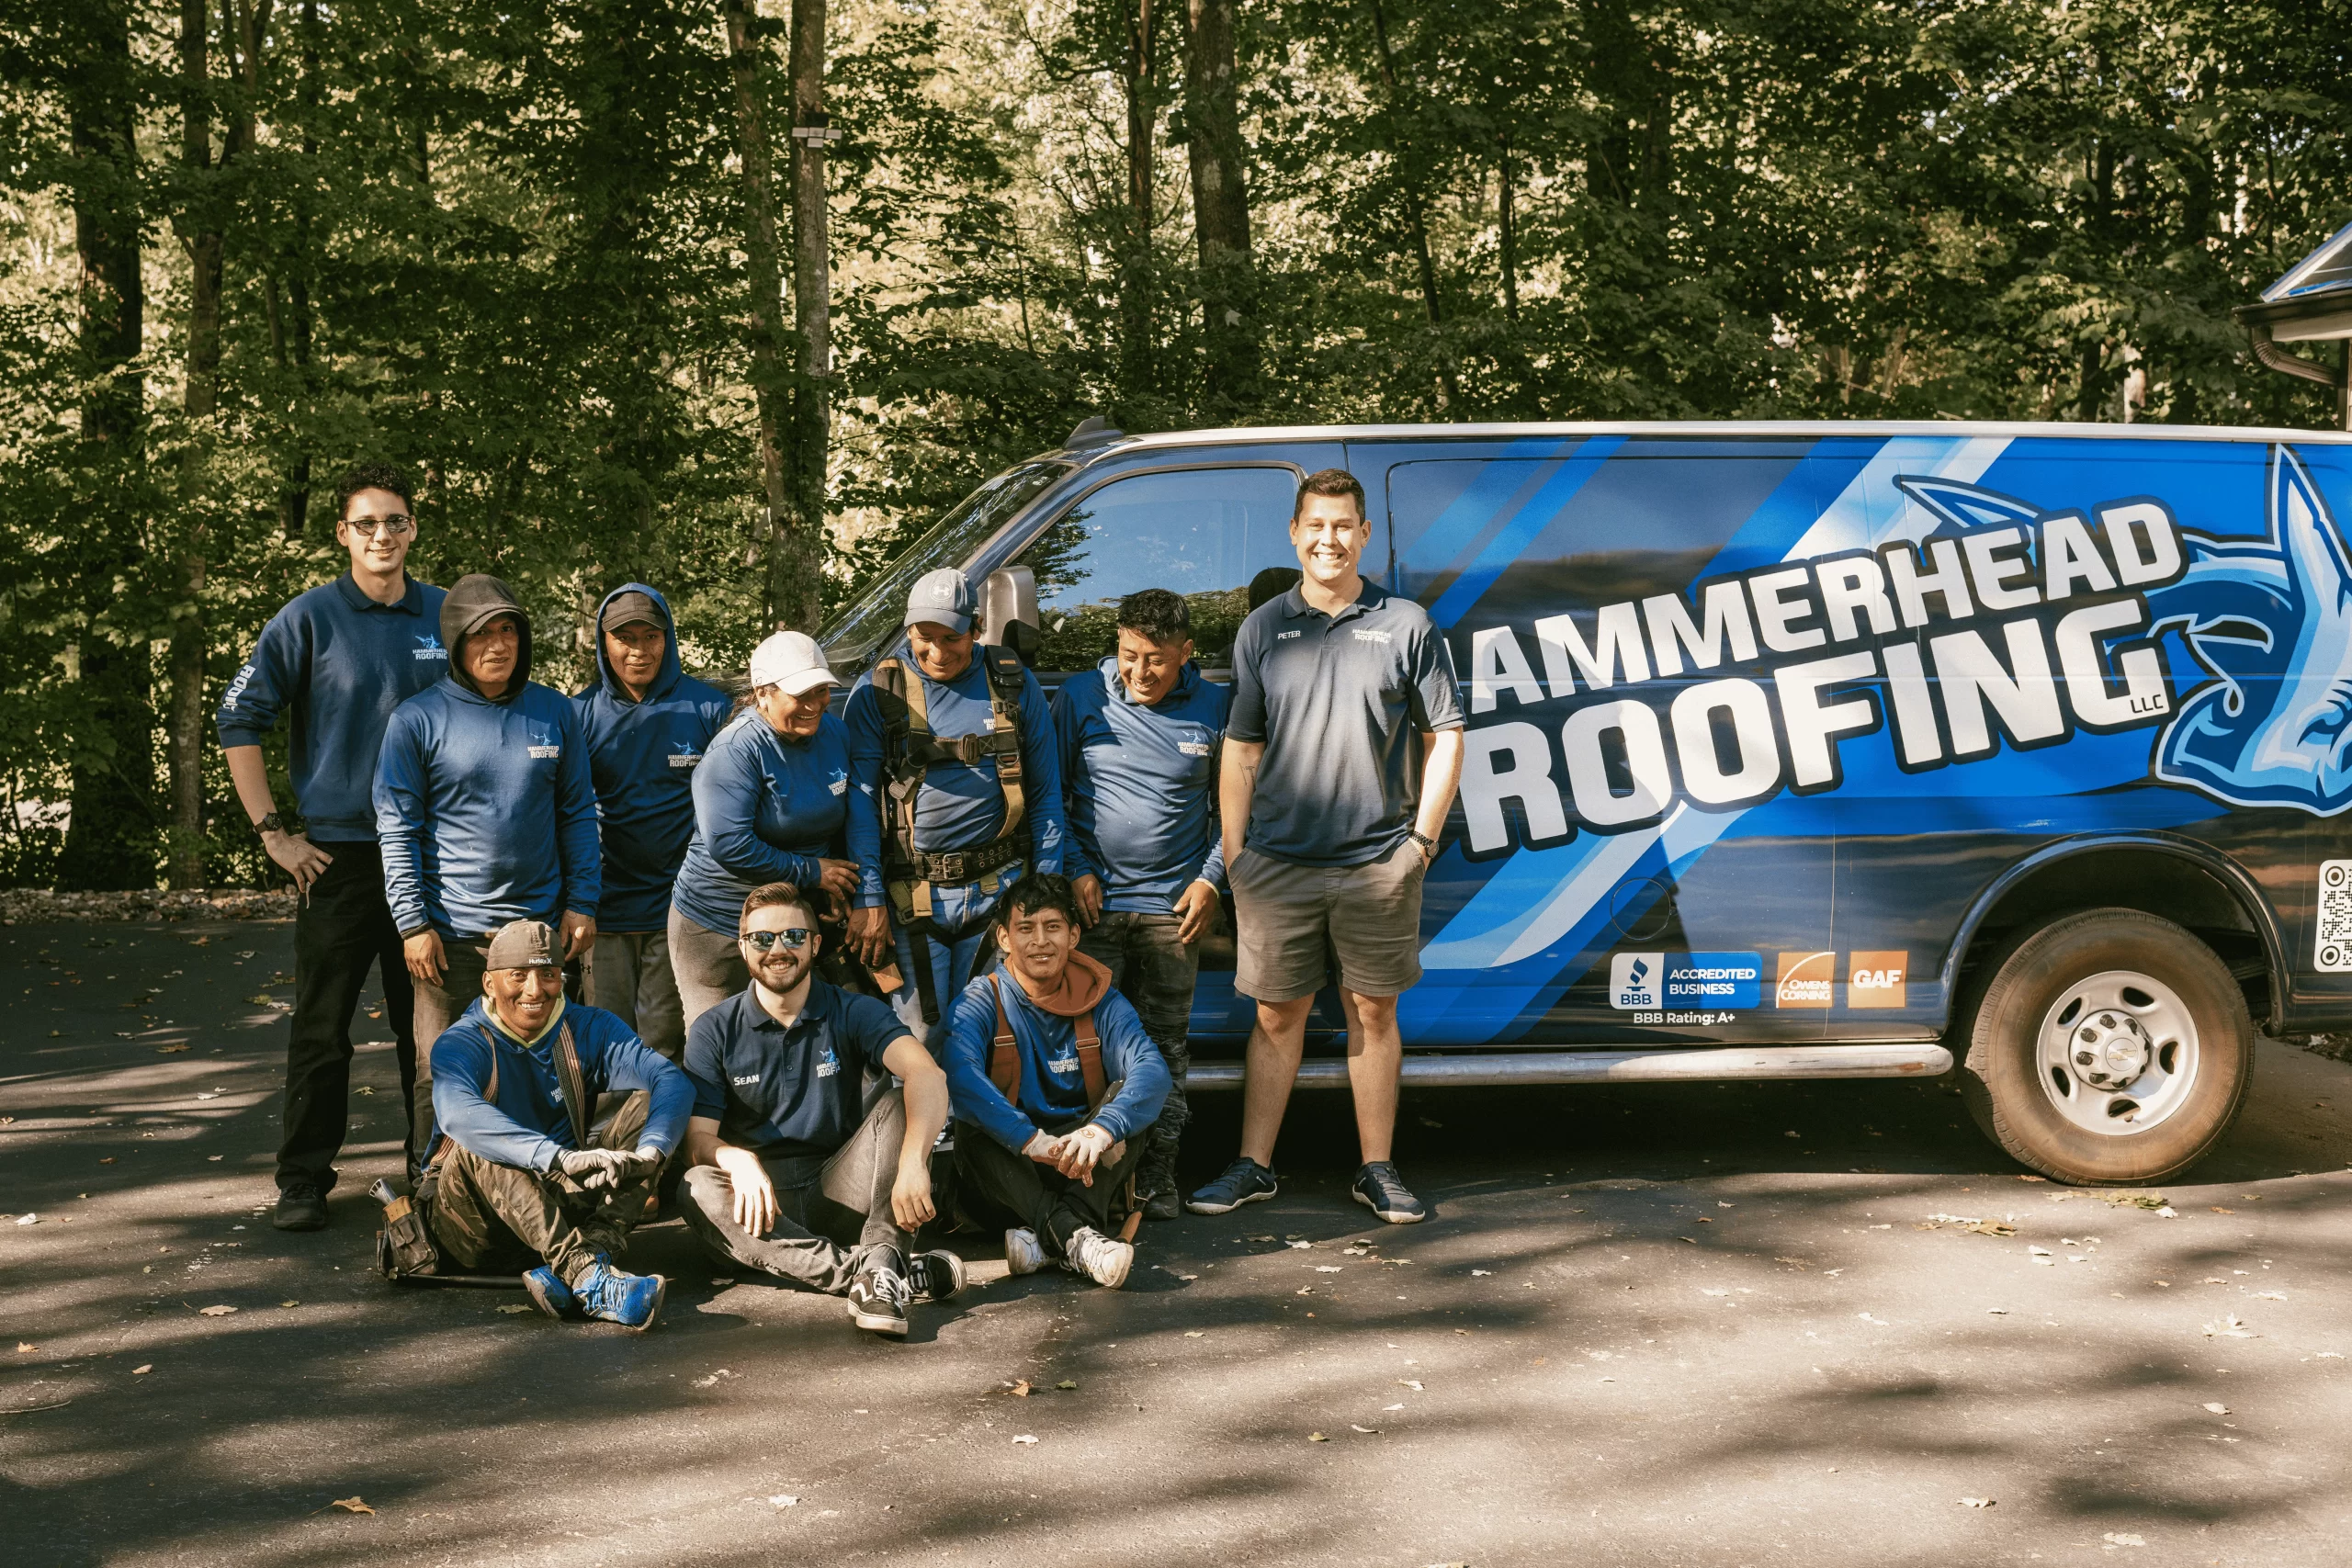 HammerHead Roofing team in front of company truck